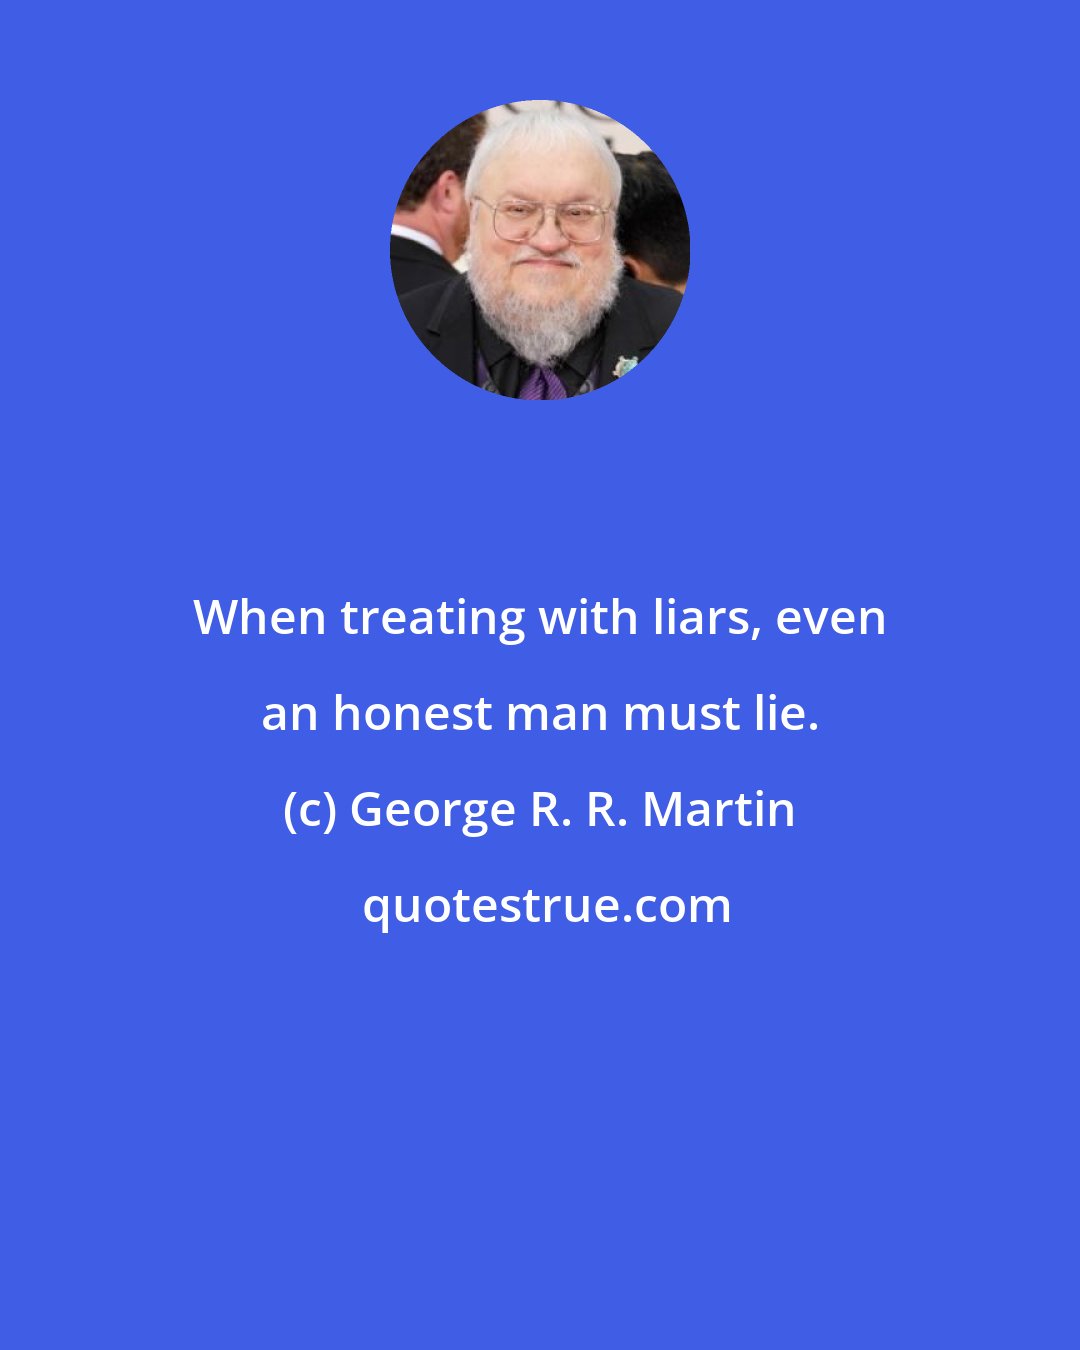 George R. R. Martin: When treating with liars, even an honest man must lie.